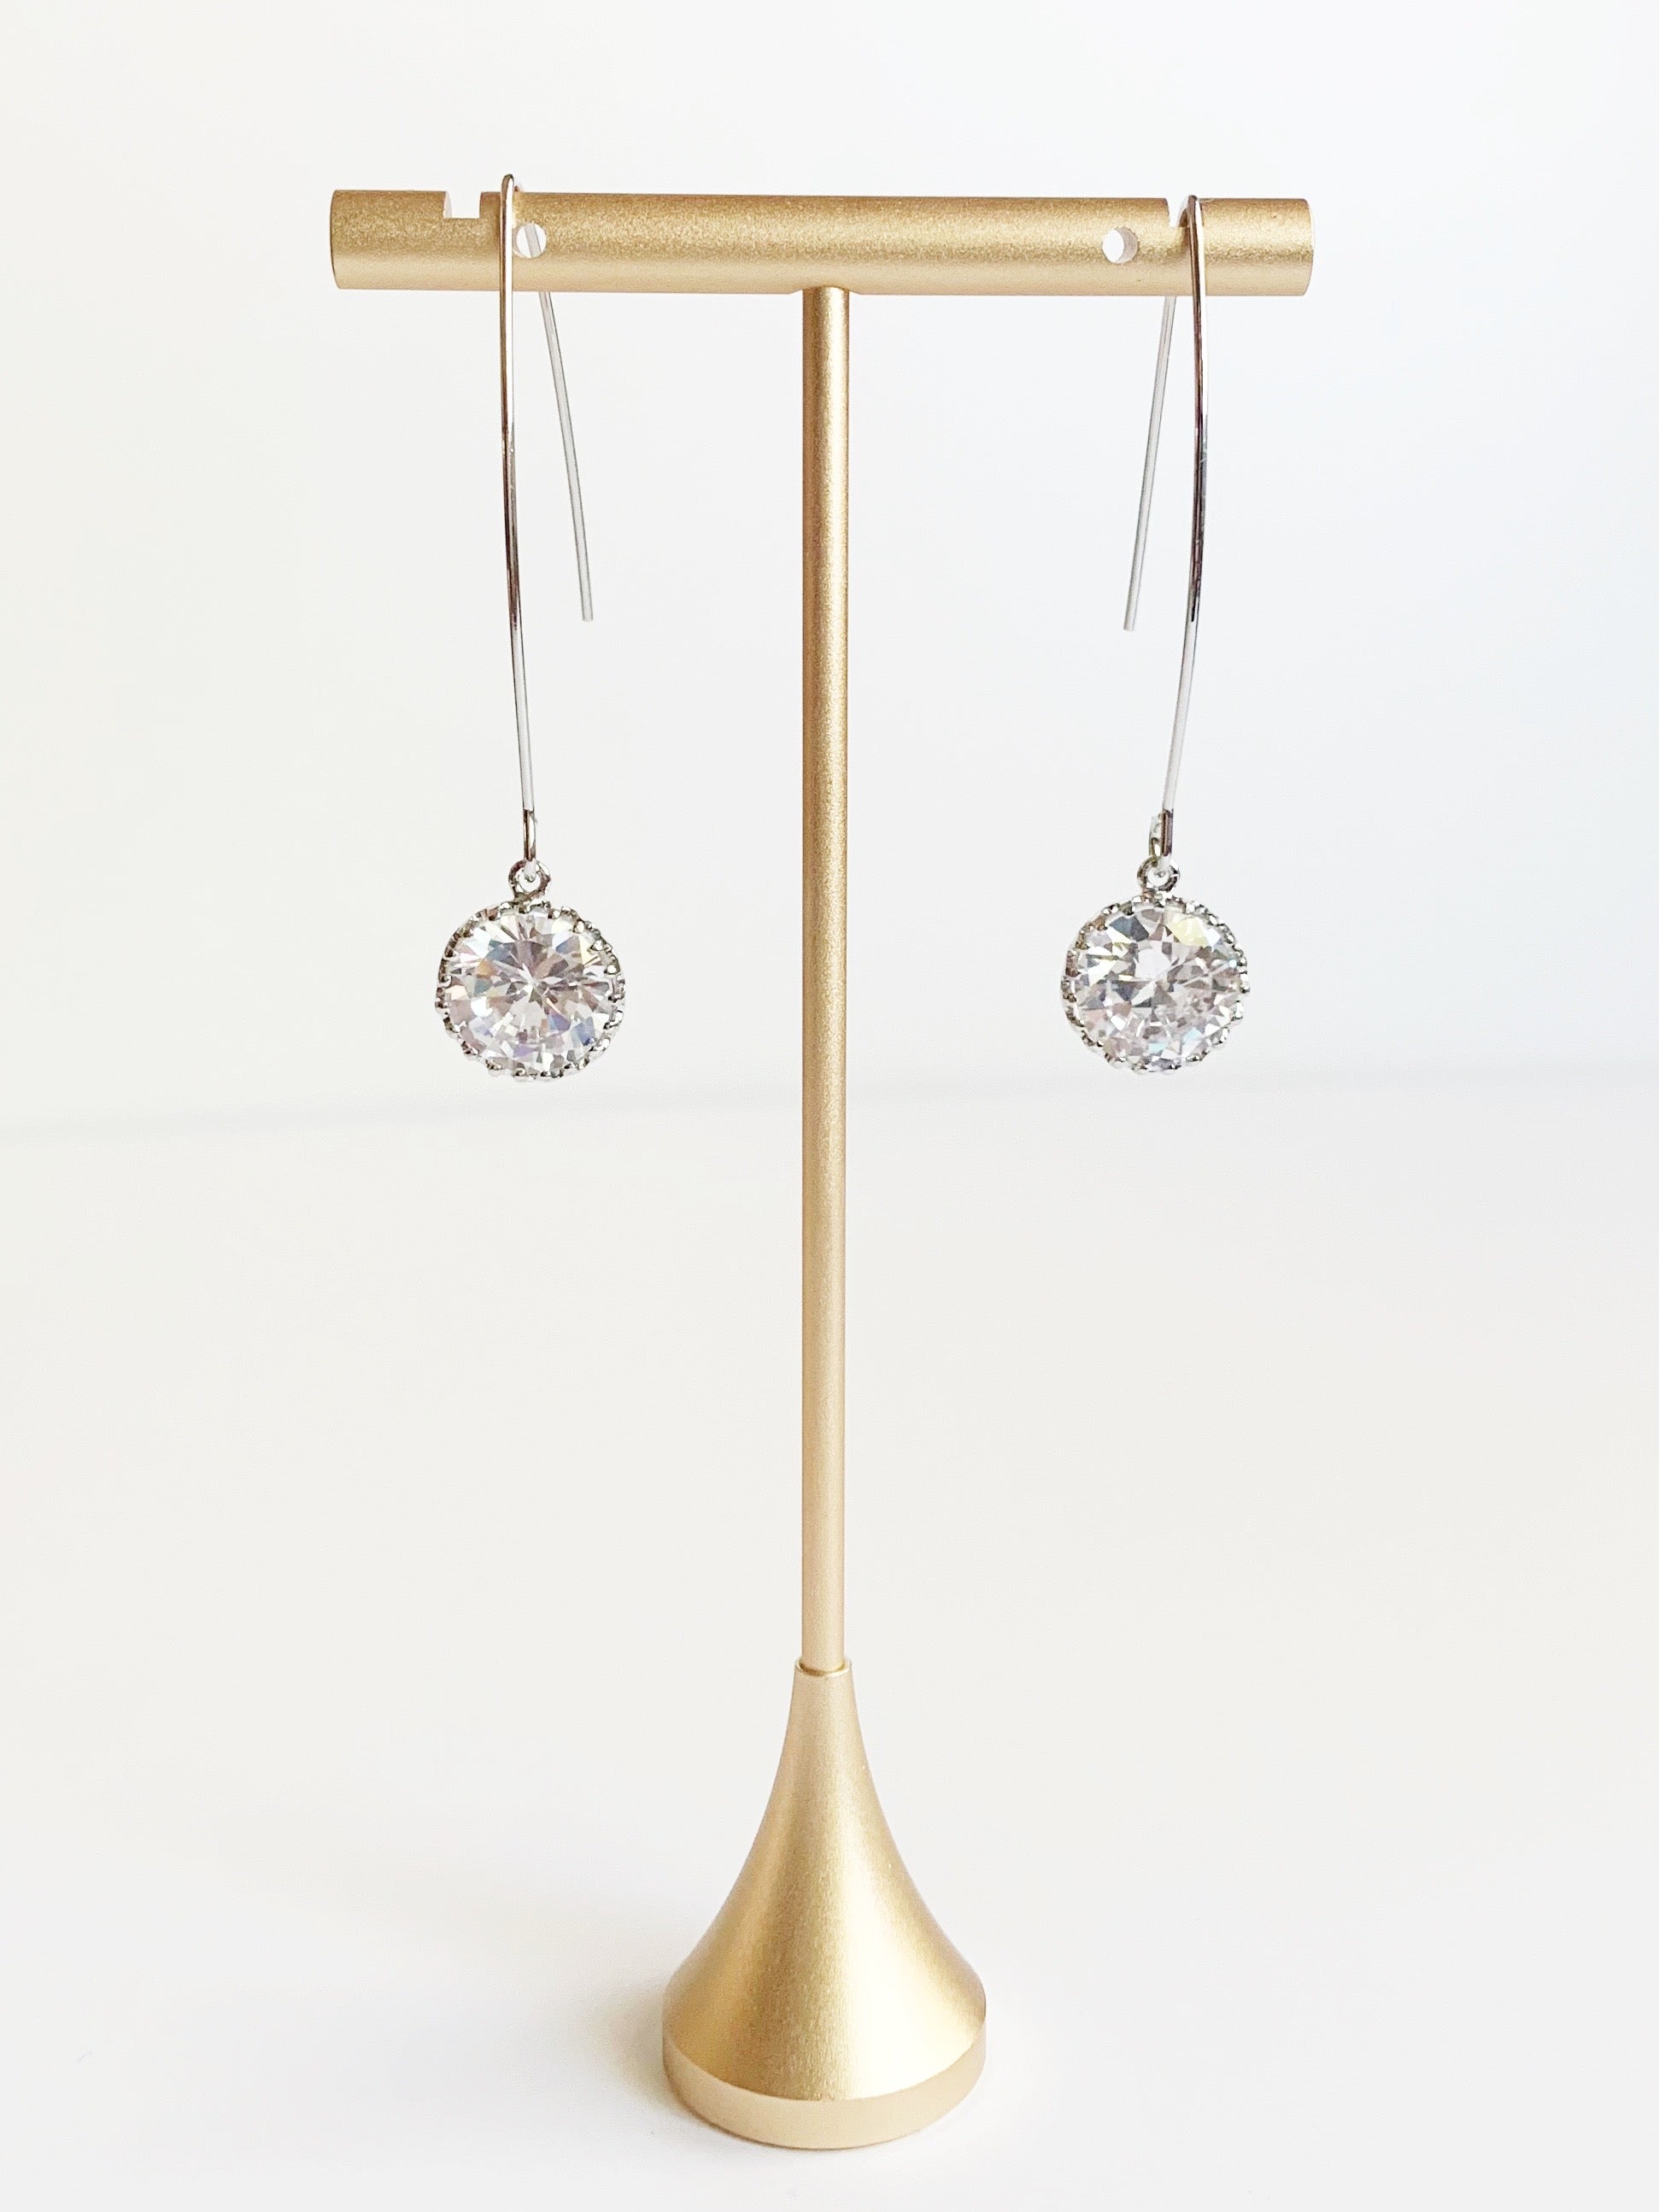 long silver earrings with crystals on gold earring tstand